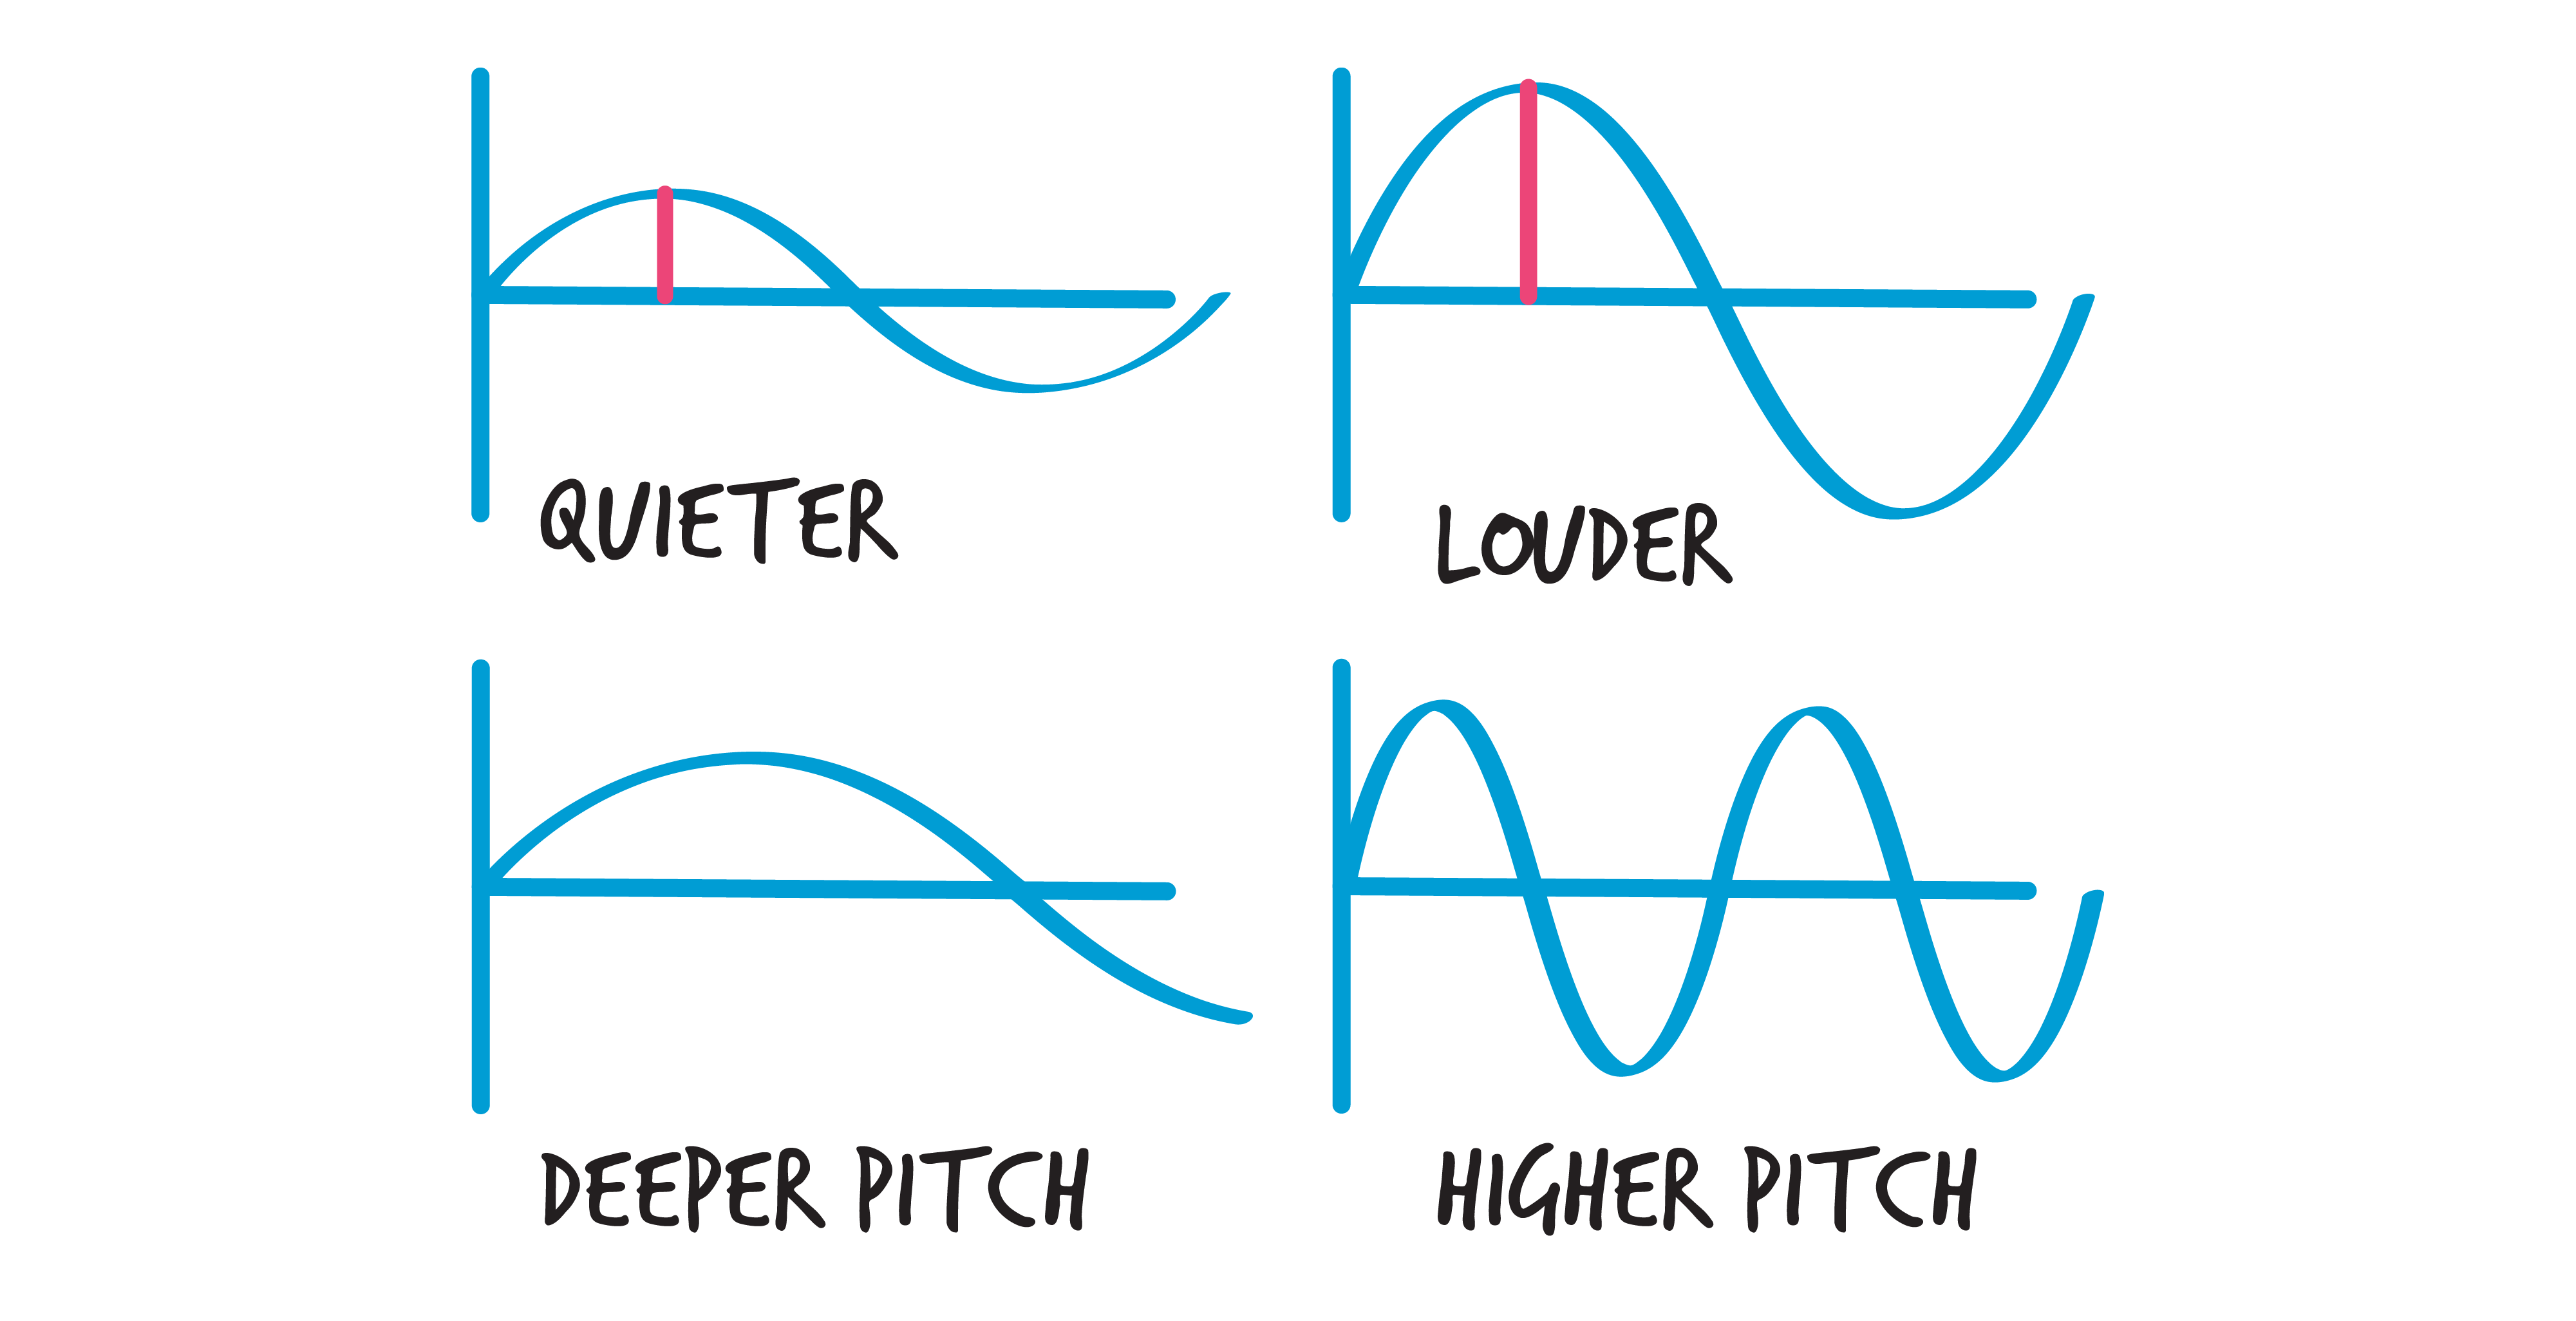 Four purple sound waves: top left representing quieter sound, top right representing louder sound, bottom left representing deeper pitch, bottom right representing higher pitch.